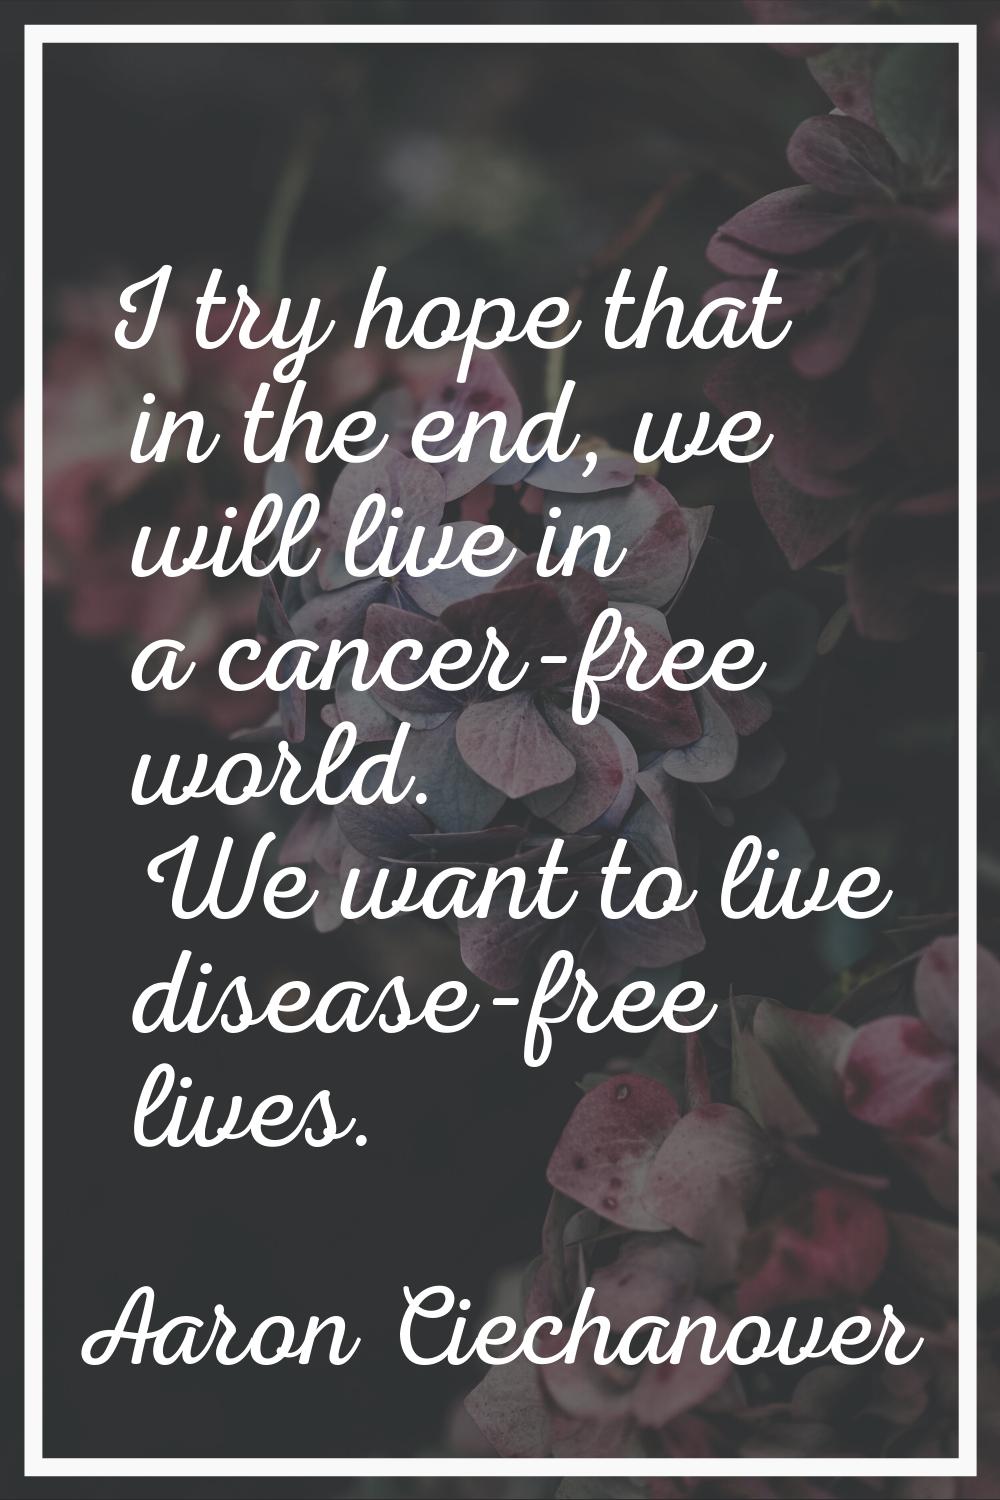 I try hope that in the end, we will live in a cancer-free world. We want to live disease-free lives